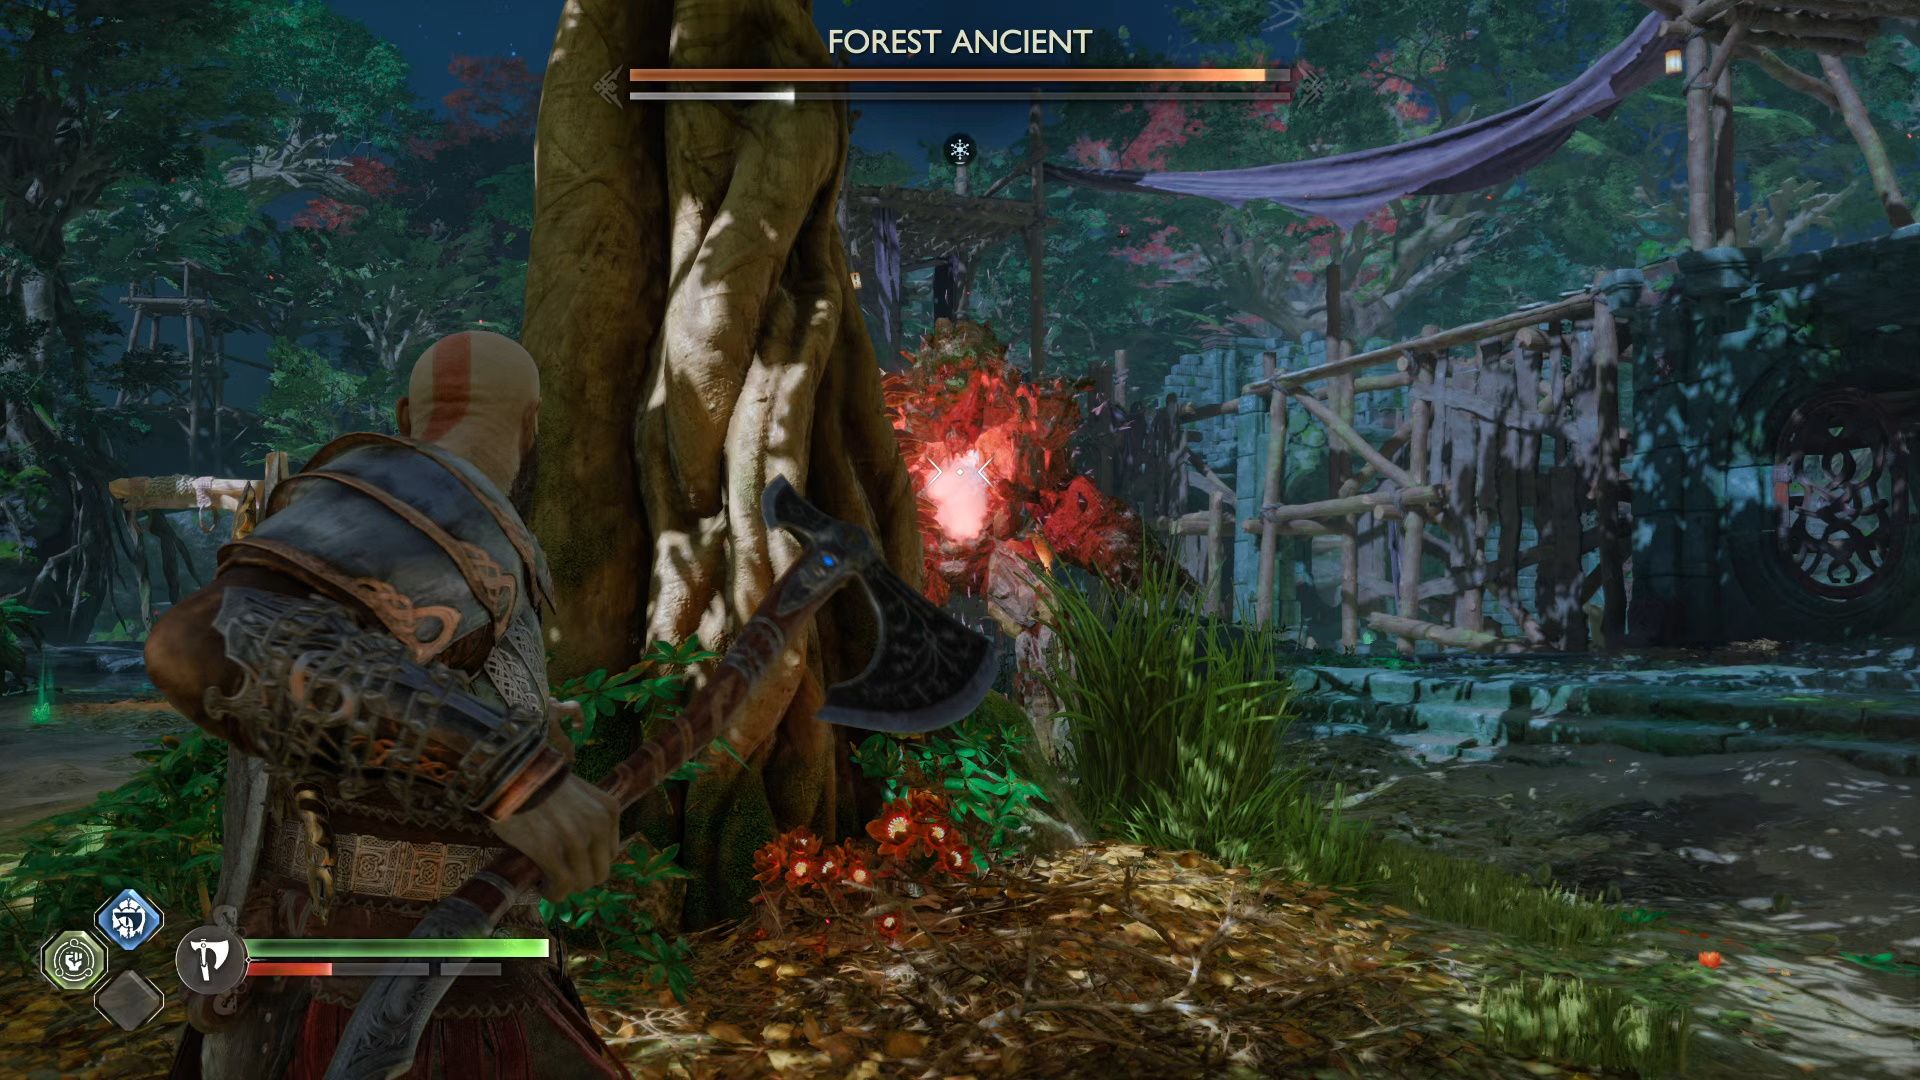 God Of War Ragnarok, Vanaheim, Hiding Behind The Tree While Fighting The Forest Ancient